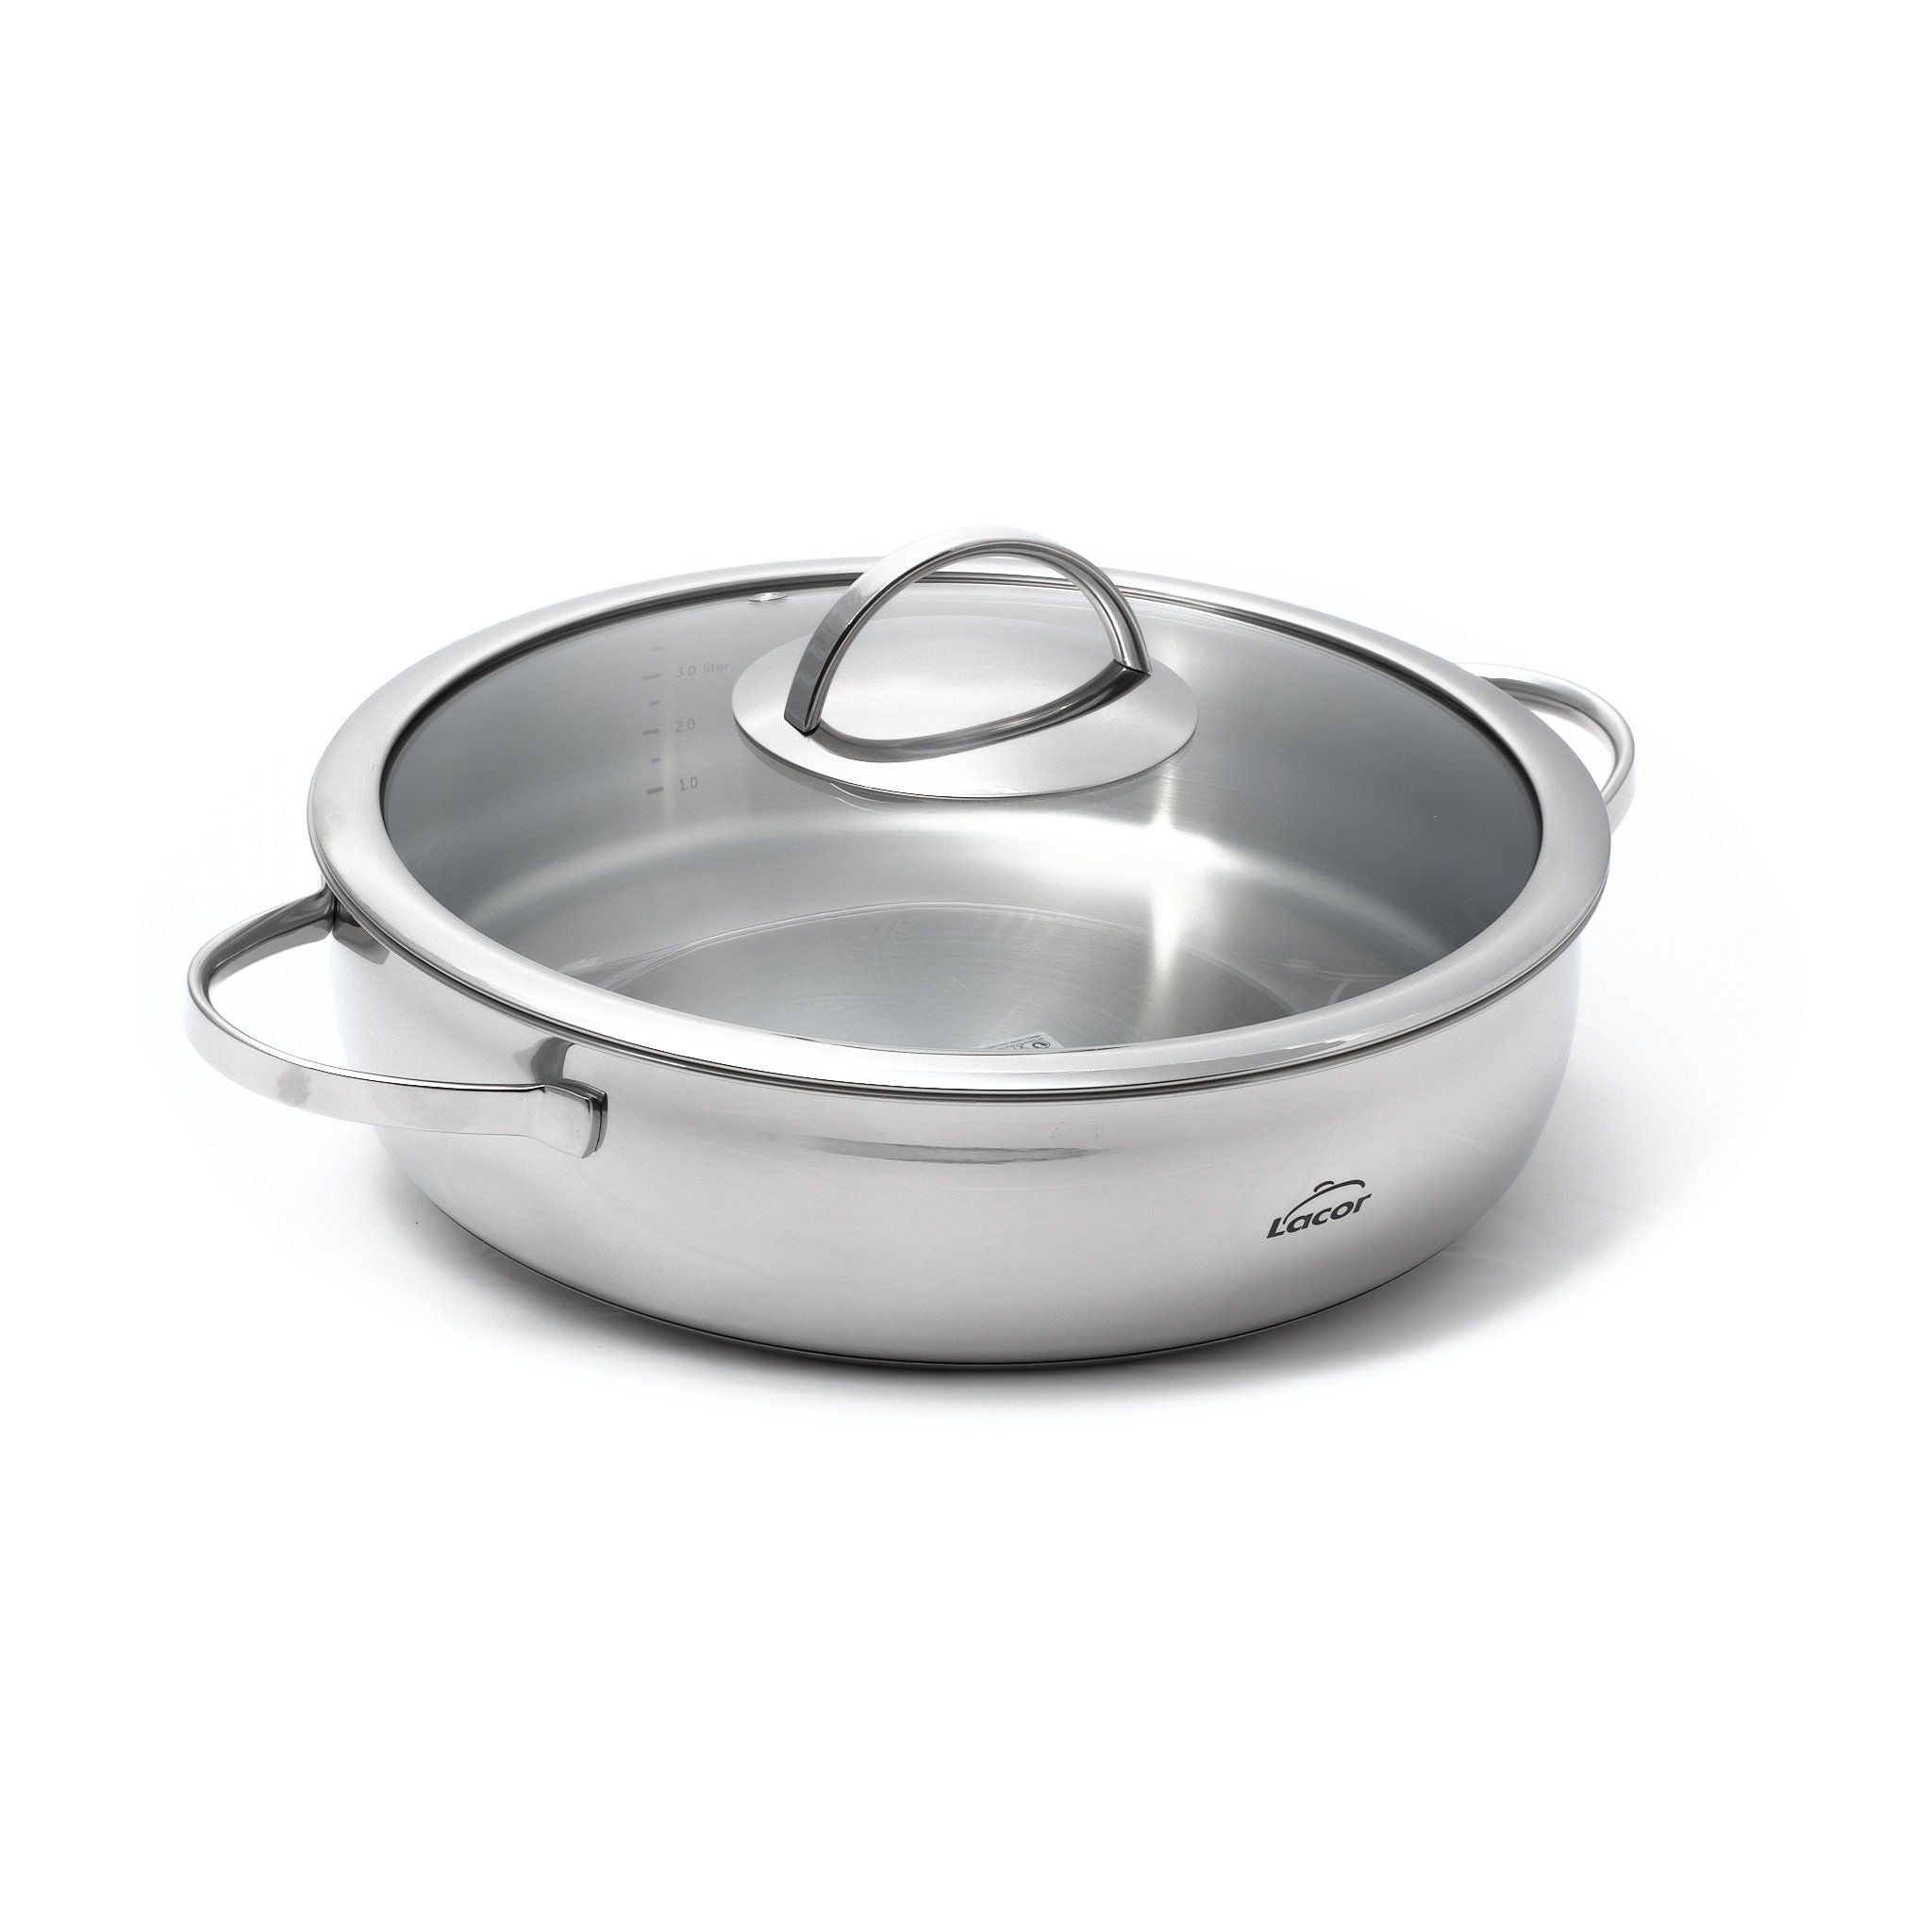 Made In Cookware - 10 Quart Stainless Steel Rondeau Pot w/ Lid 